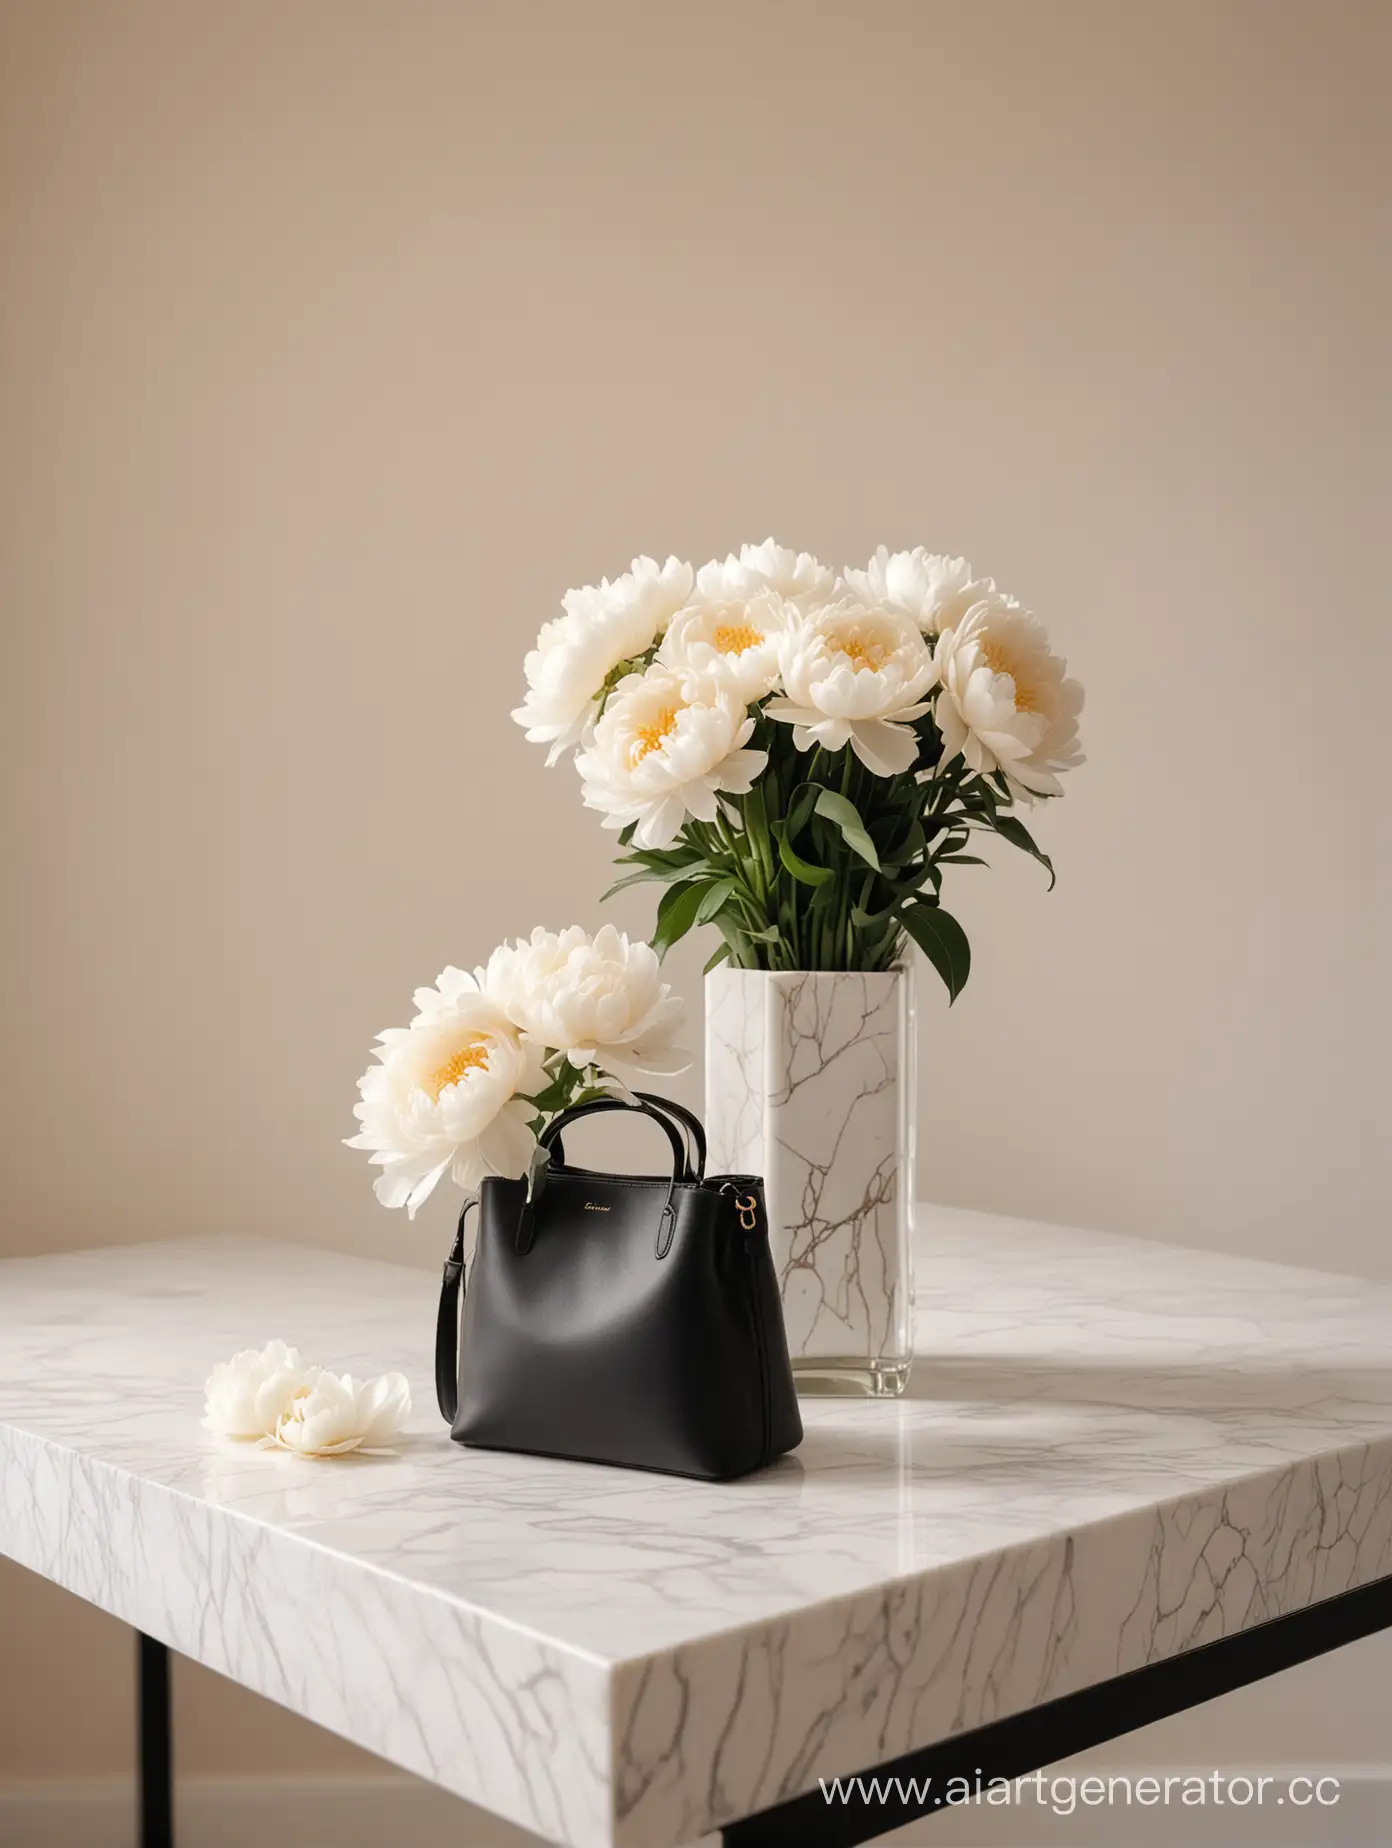 realistic close-up photo: a black mini bag stands on a long white marble table with black legs, on the table a small bouquet of white pions in a white vase. The background is a minimalistic room with light peach wallpaper, illuminated by warm and gentle light